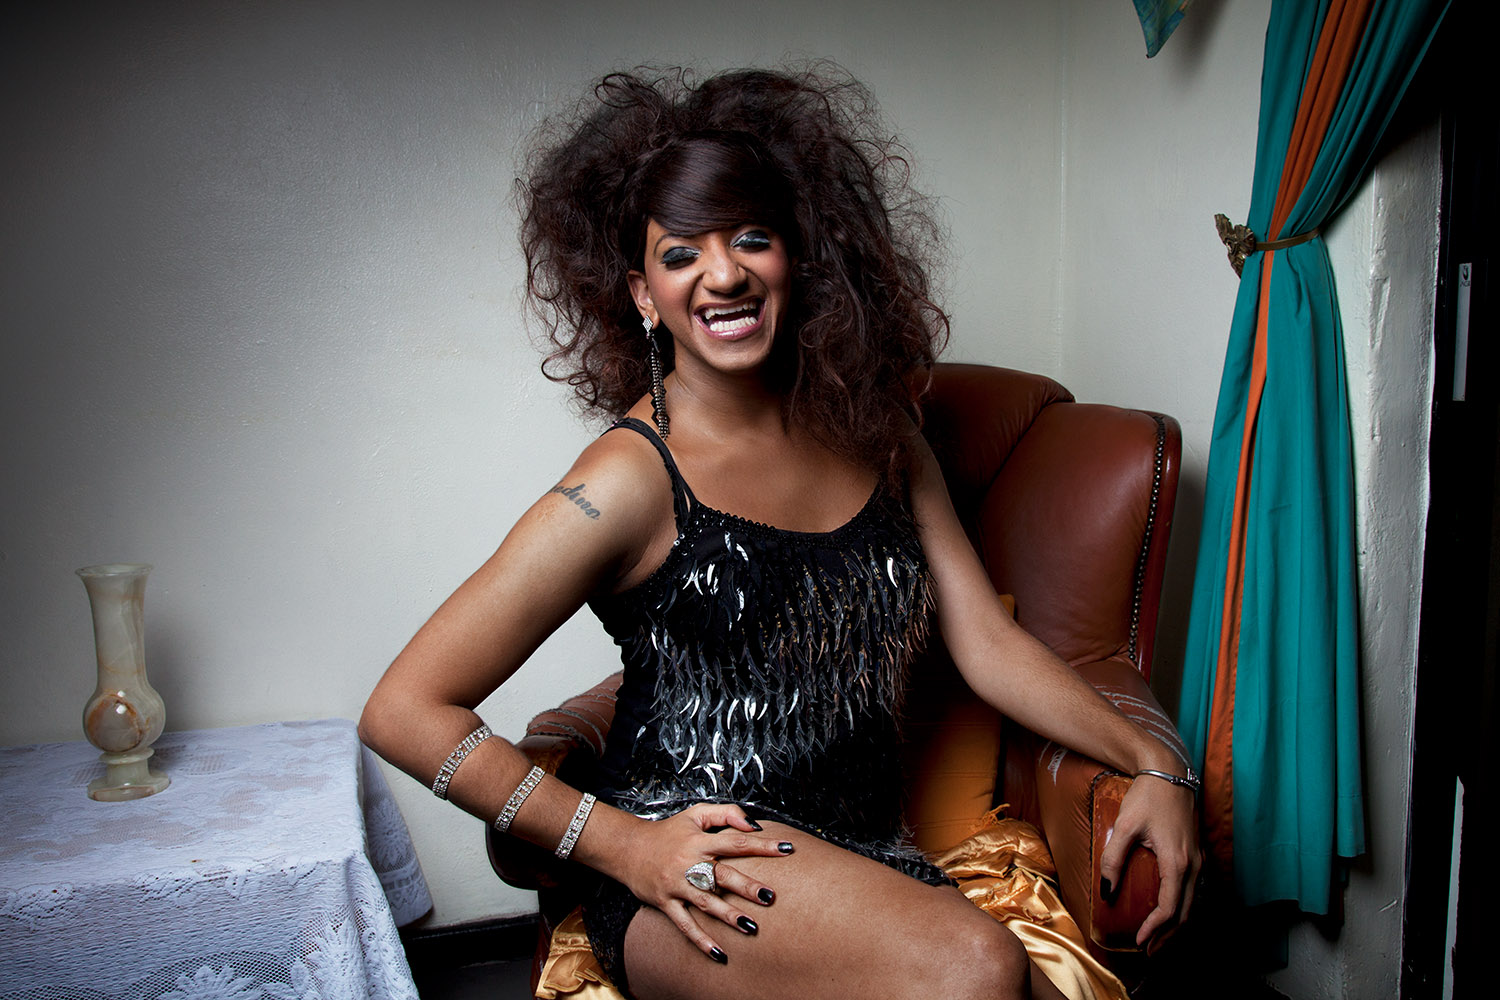  Chedino, backstage, during a Divas in Cabaret performance, Elsies River, Cape Town, 2012.  Divas in Cabaret was a lip-sync group formed by Chedino and which consisted of LGBTQ community members. The group performed covers of songs by Whitney Houston